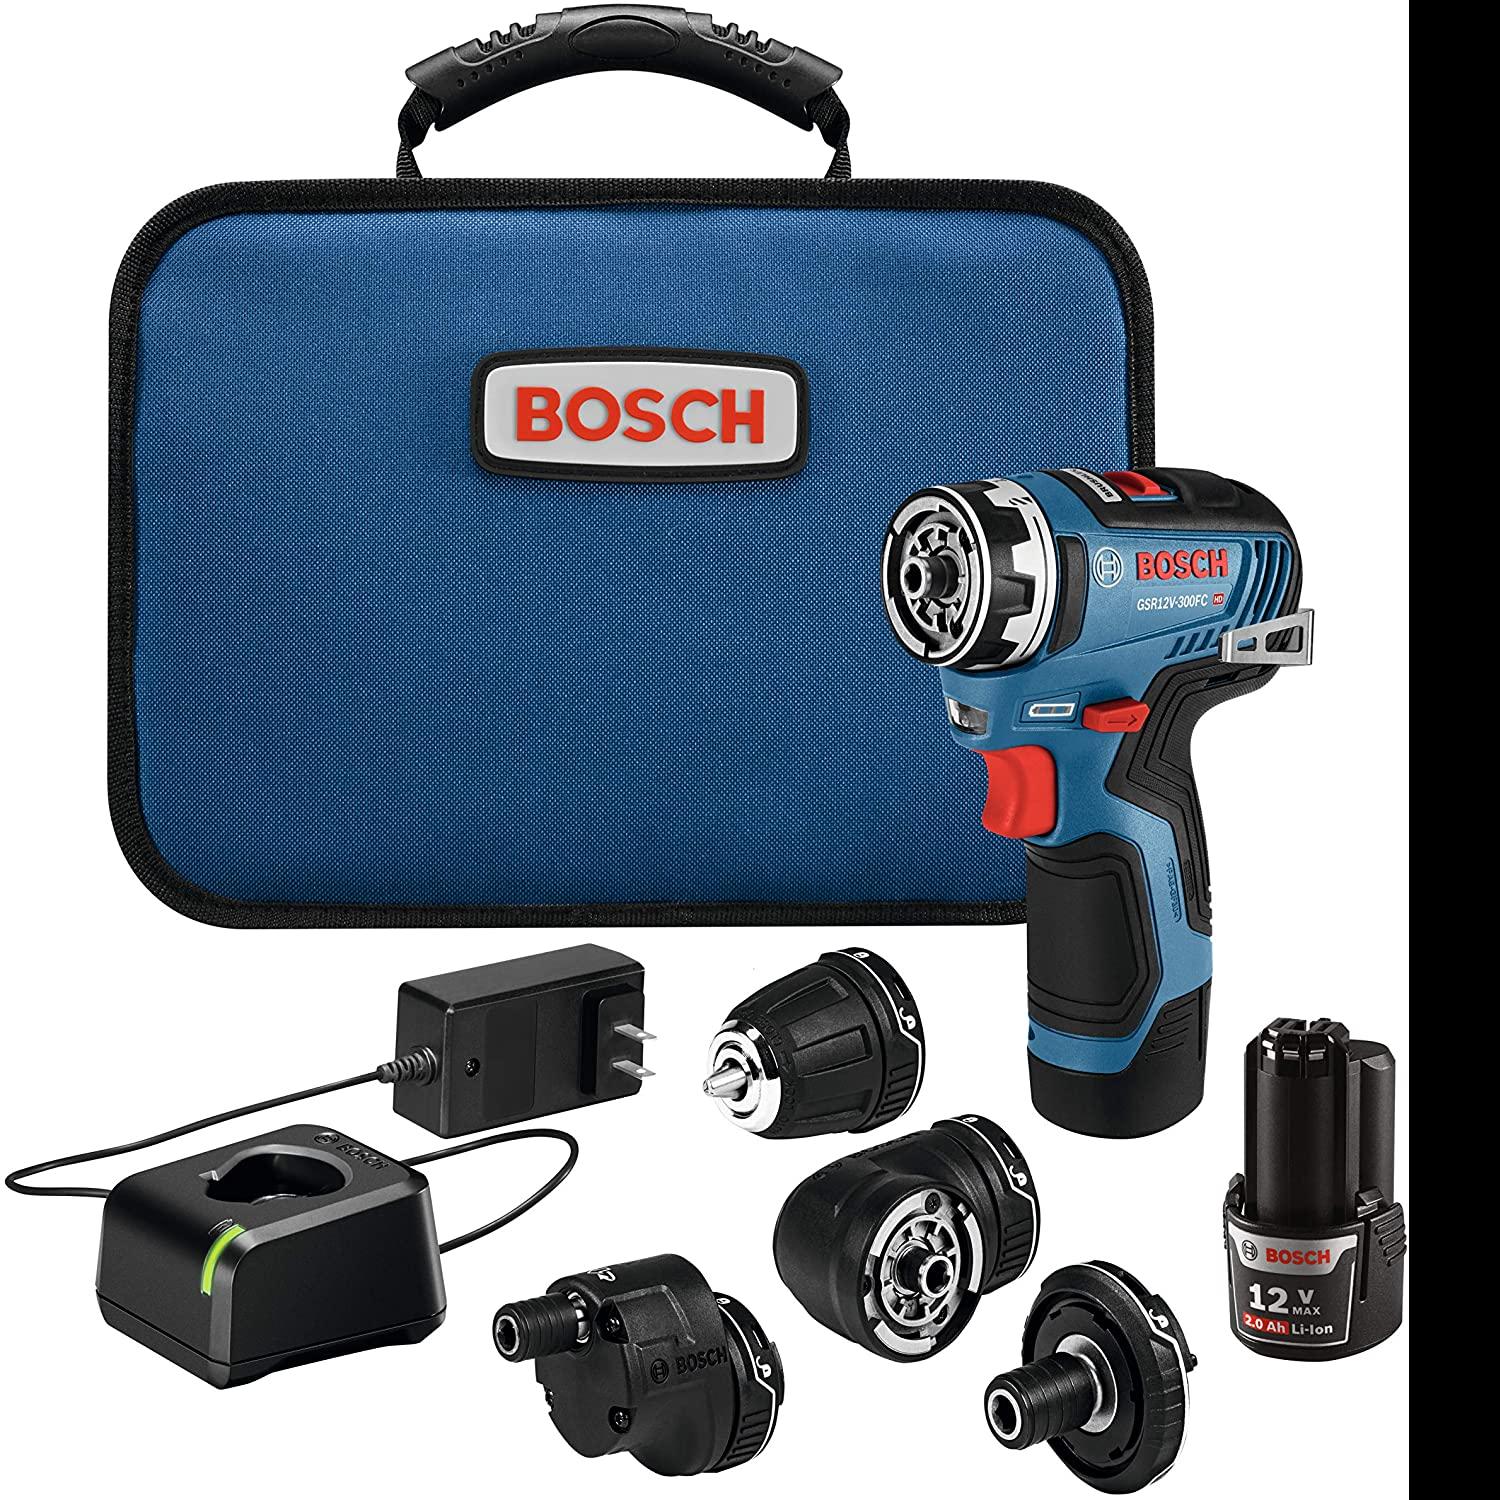 Bosch 12V Max EC Flexiclick Drill Driver System Kit for $149 Shipped